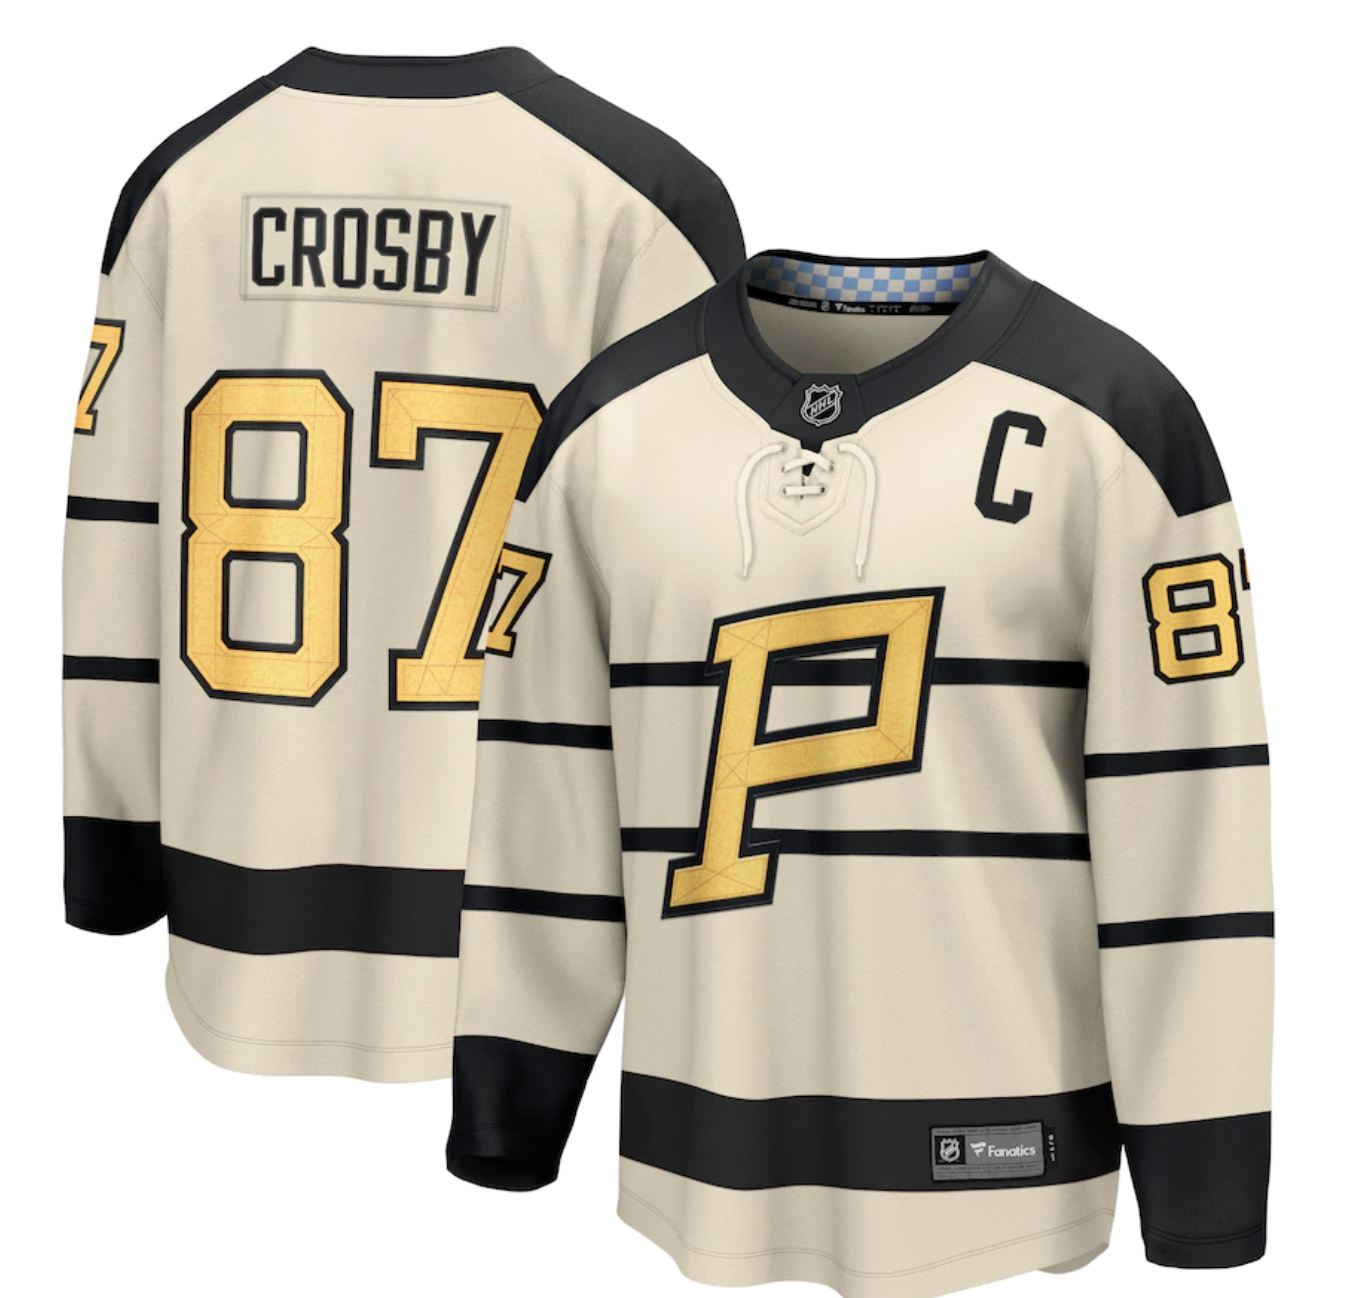 Pittsburgh Penguins Will Wear Winter Classic Jersey in Two More Games - The  Hockey News Pittsburgh Penguins News, Analysis and More